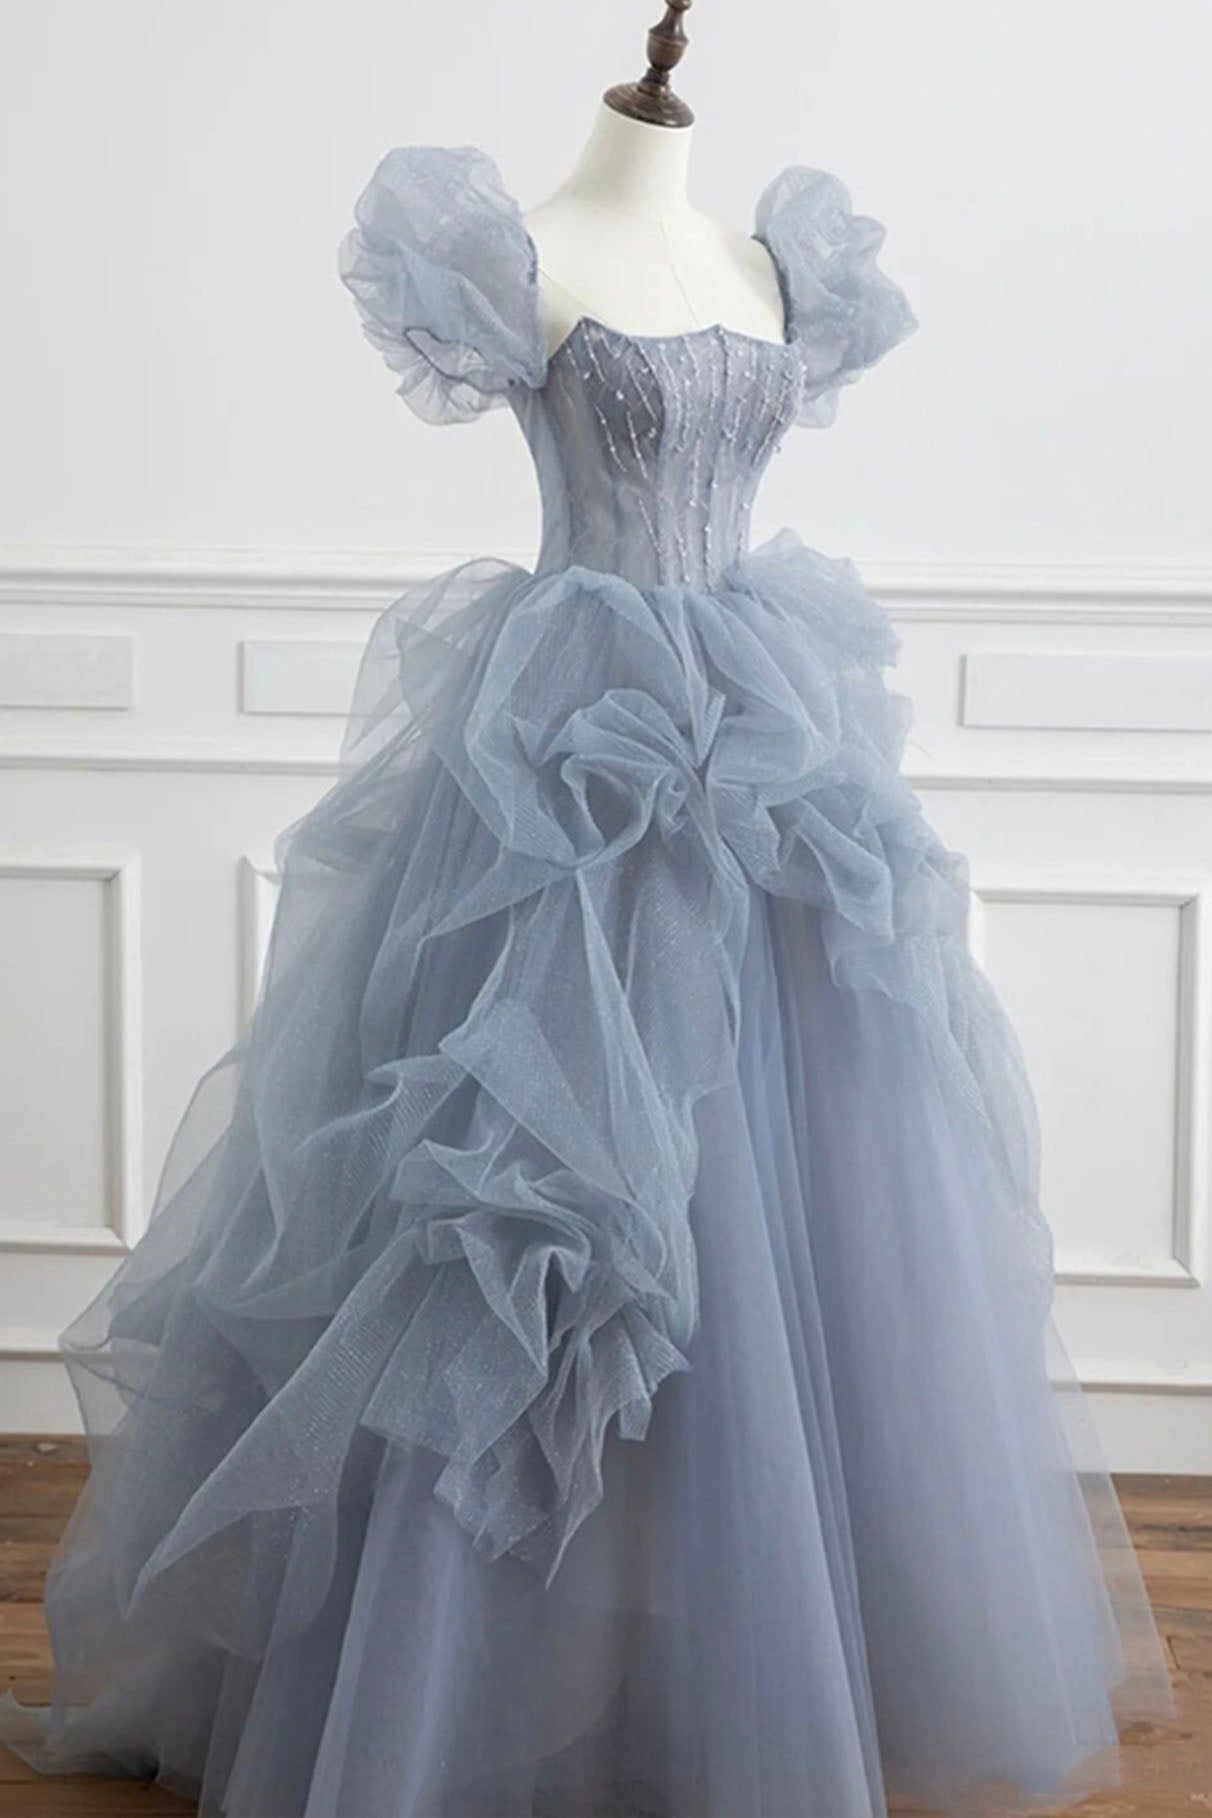 Party Dresses For Summer, Gray Tulle Long A-Line Prom Dress, Gray Short Sleeve Evening Dress